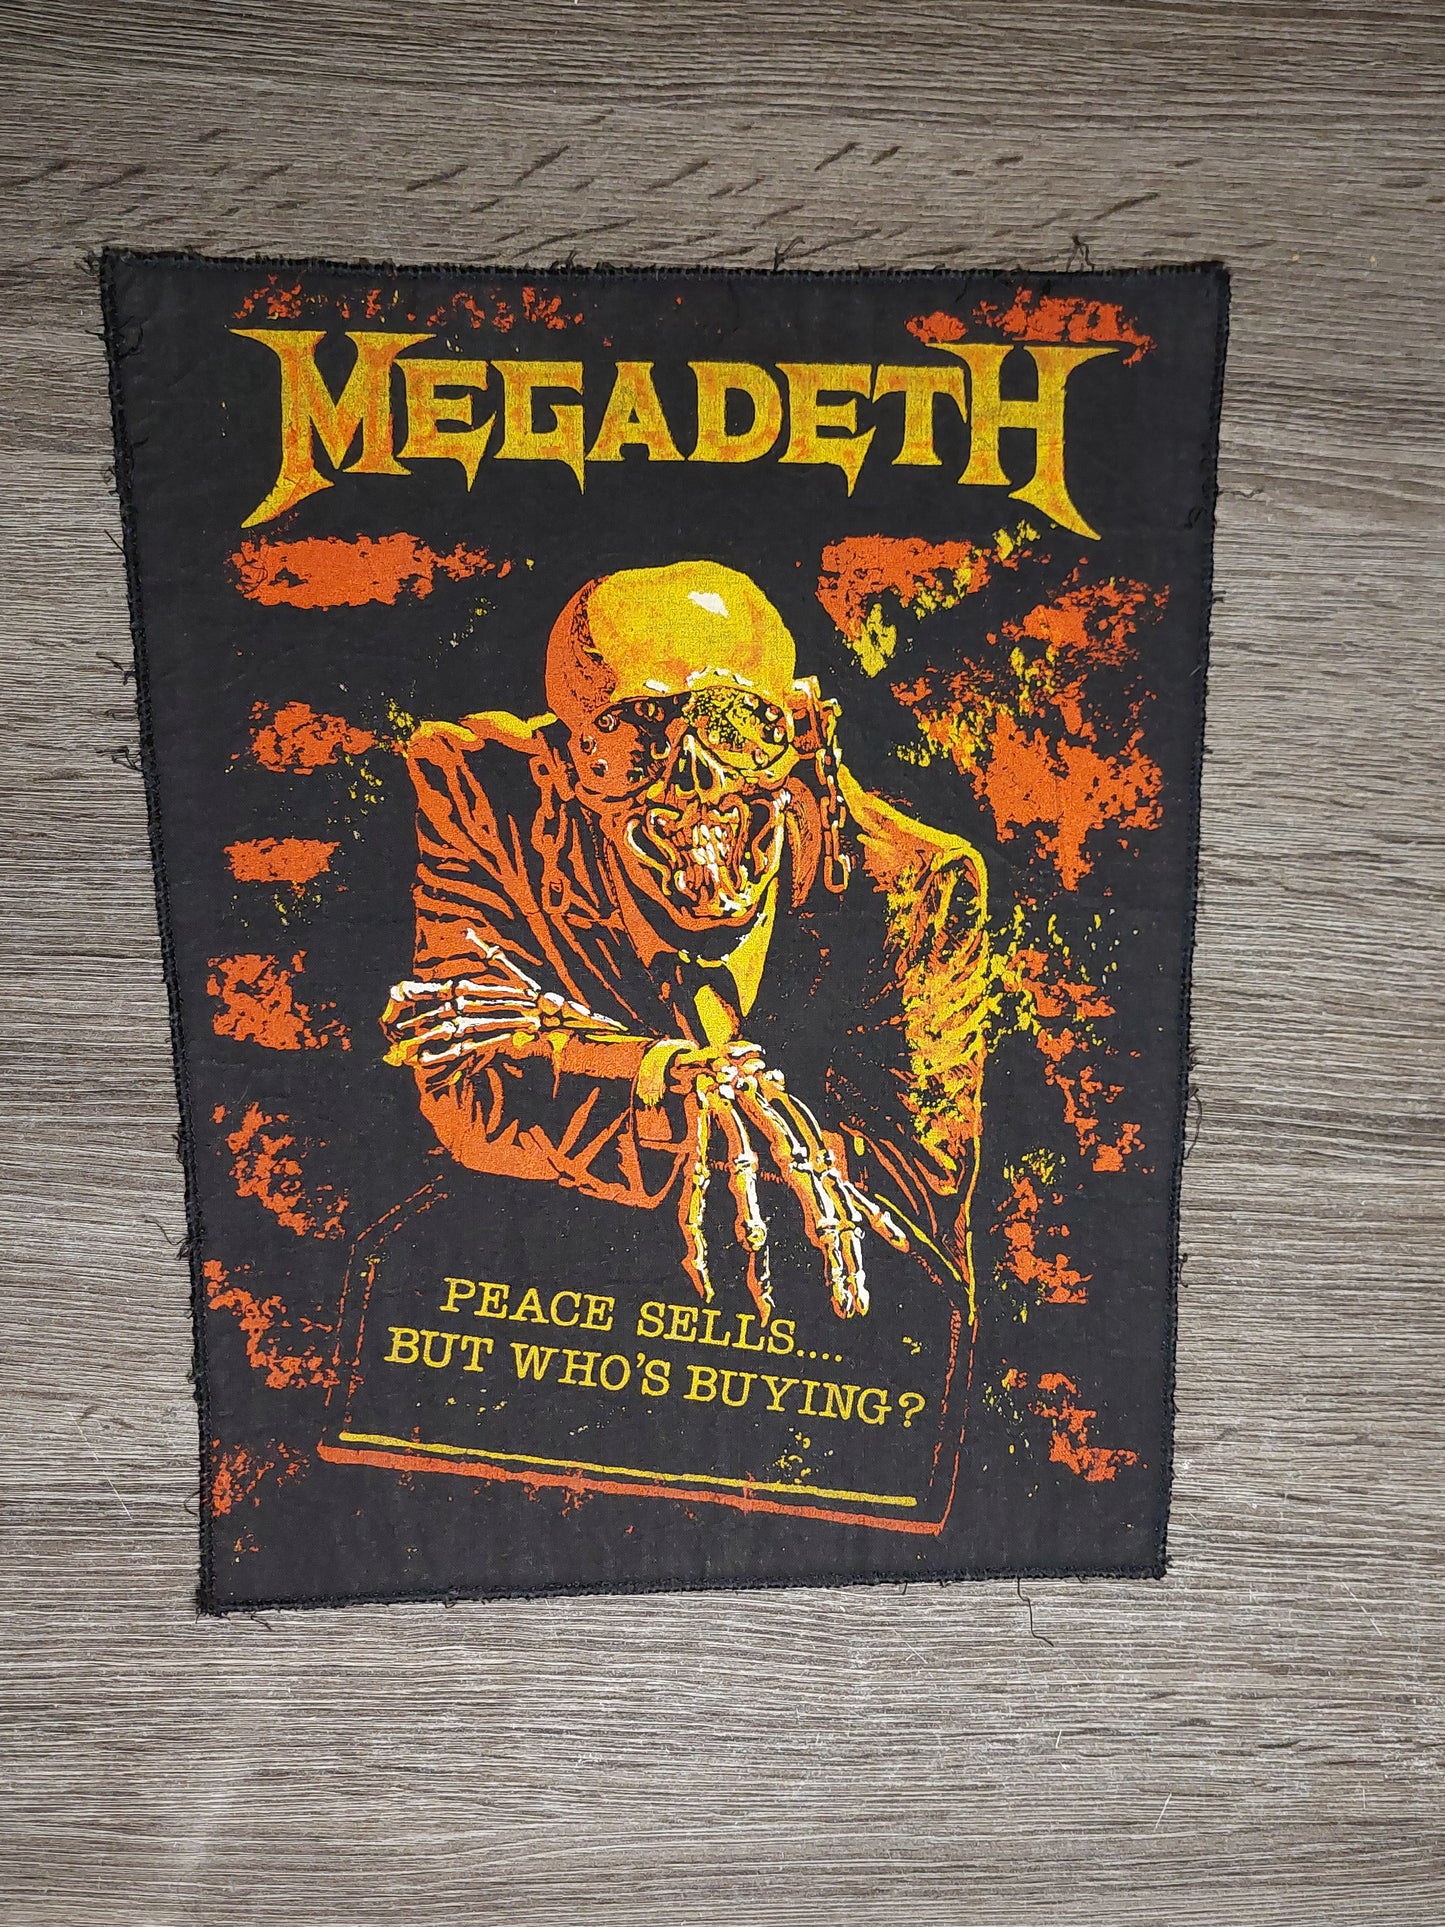 Megadeth - Peace sells backpatch